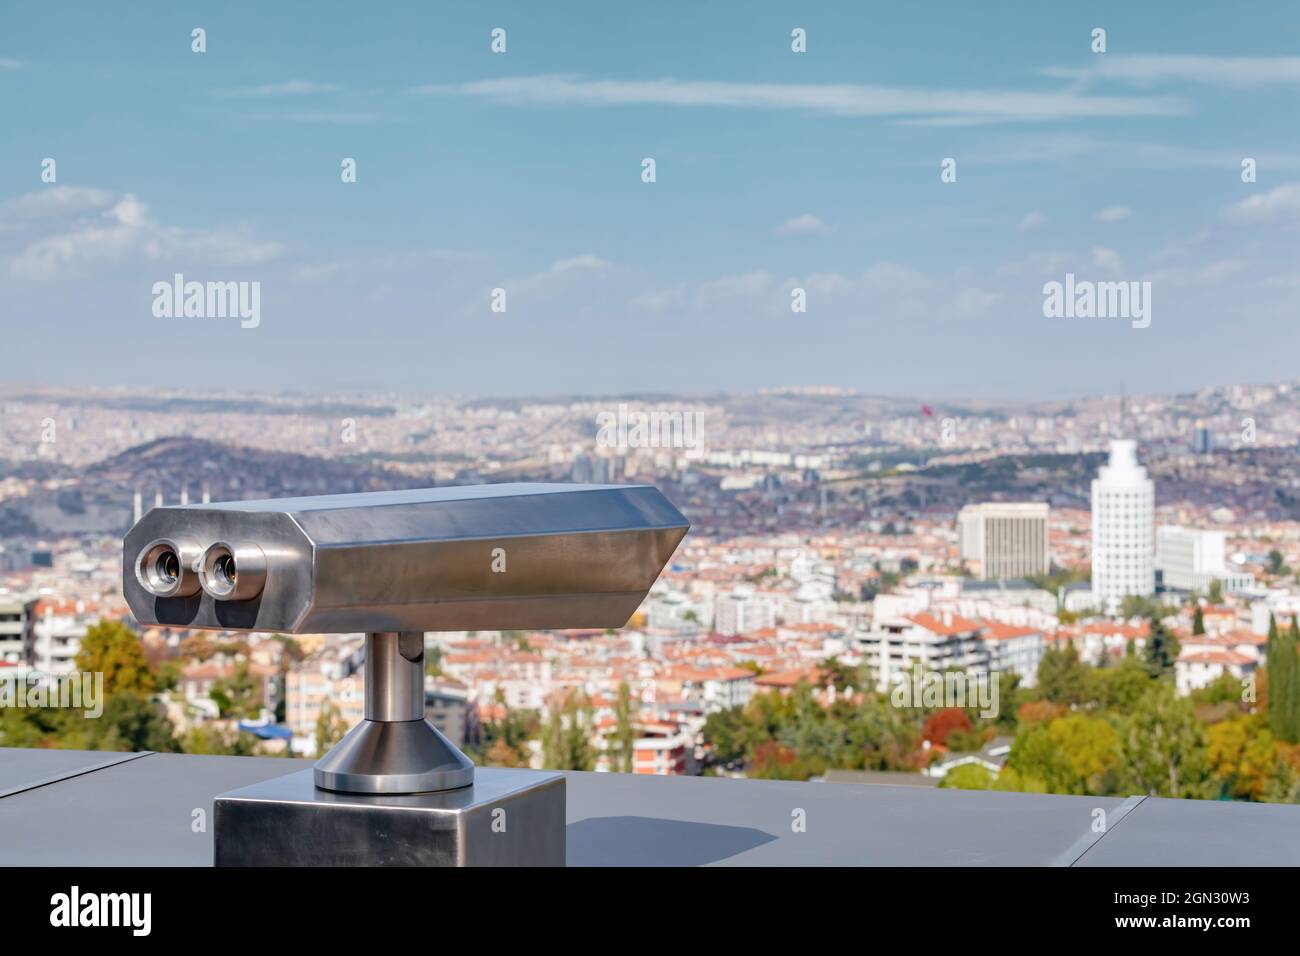 Coin operated binocular viewer at the terrace floor of Atakule in front of blurry Ankara view. Stock Photo